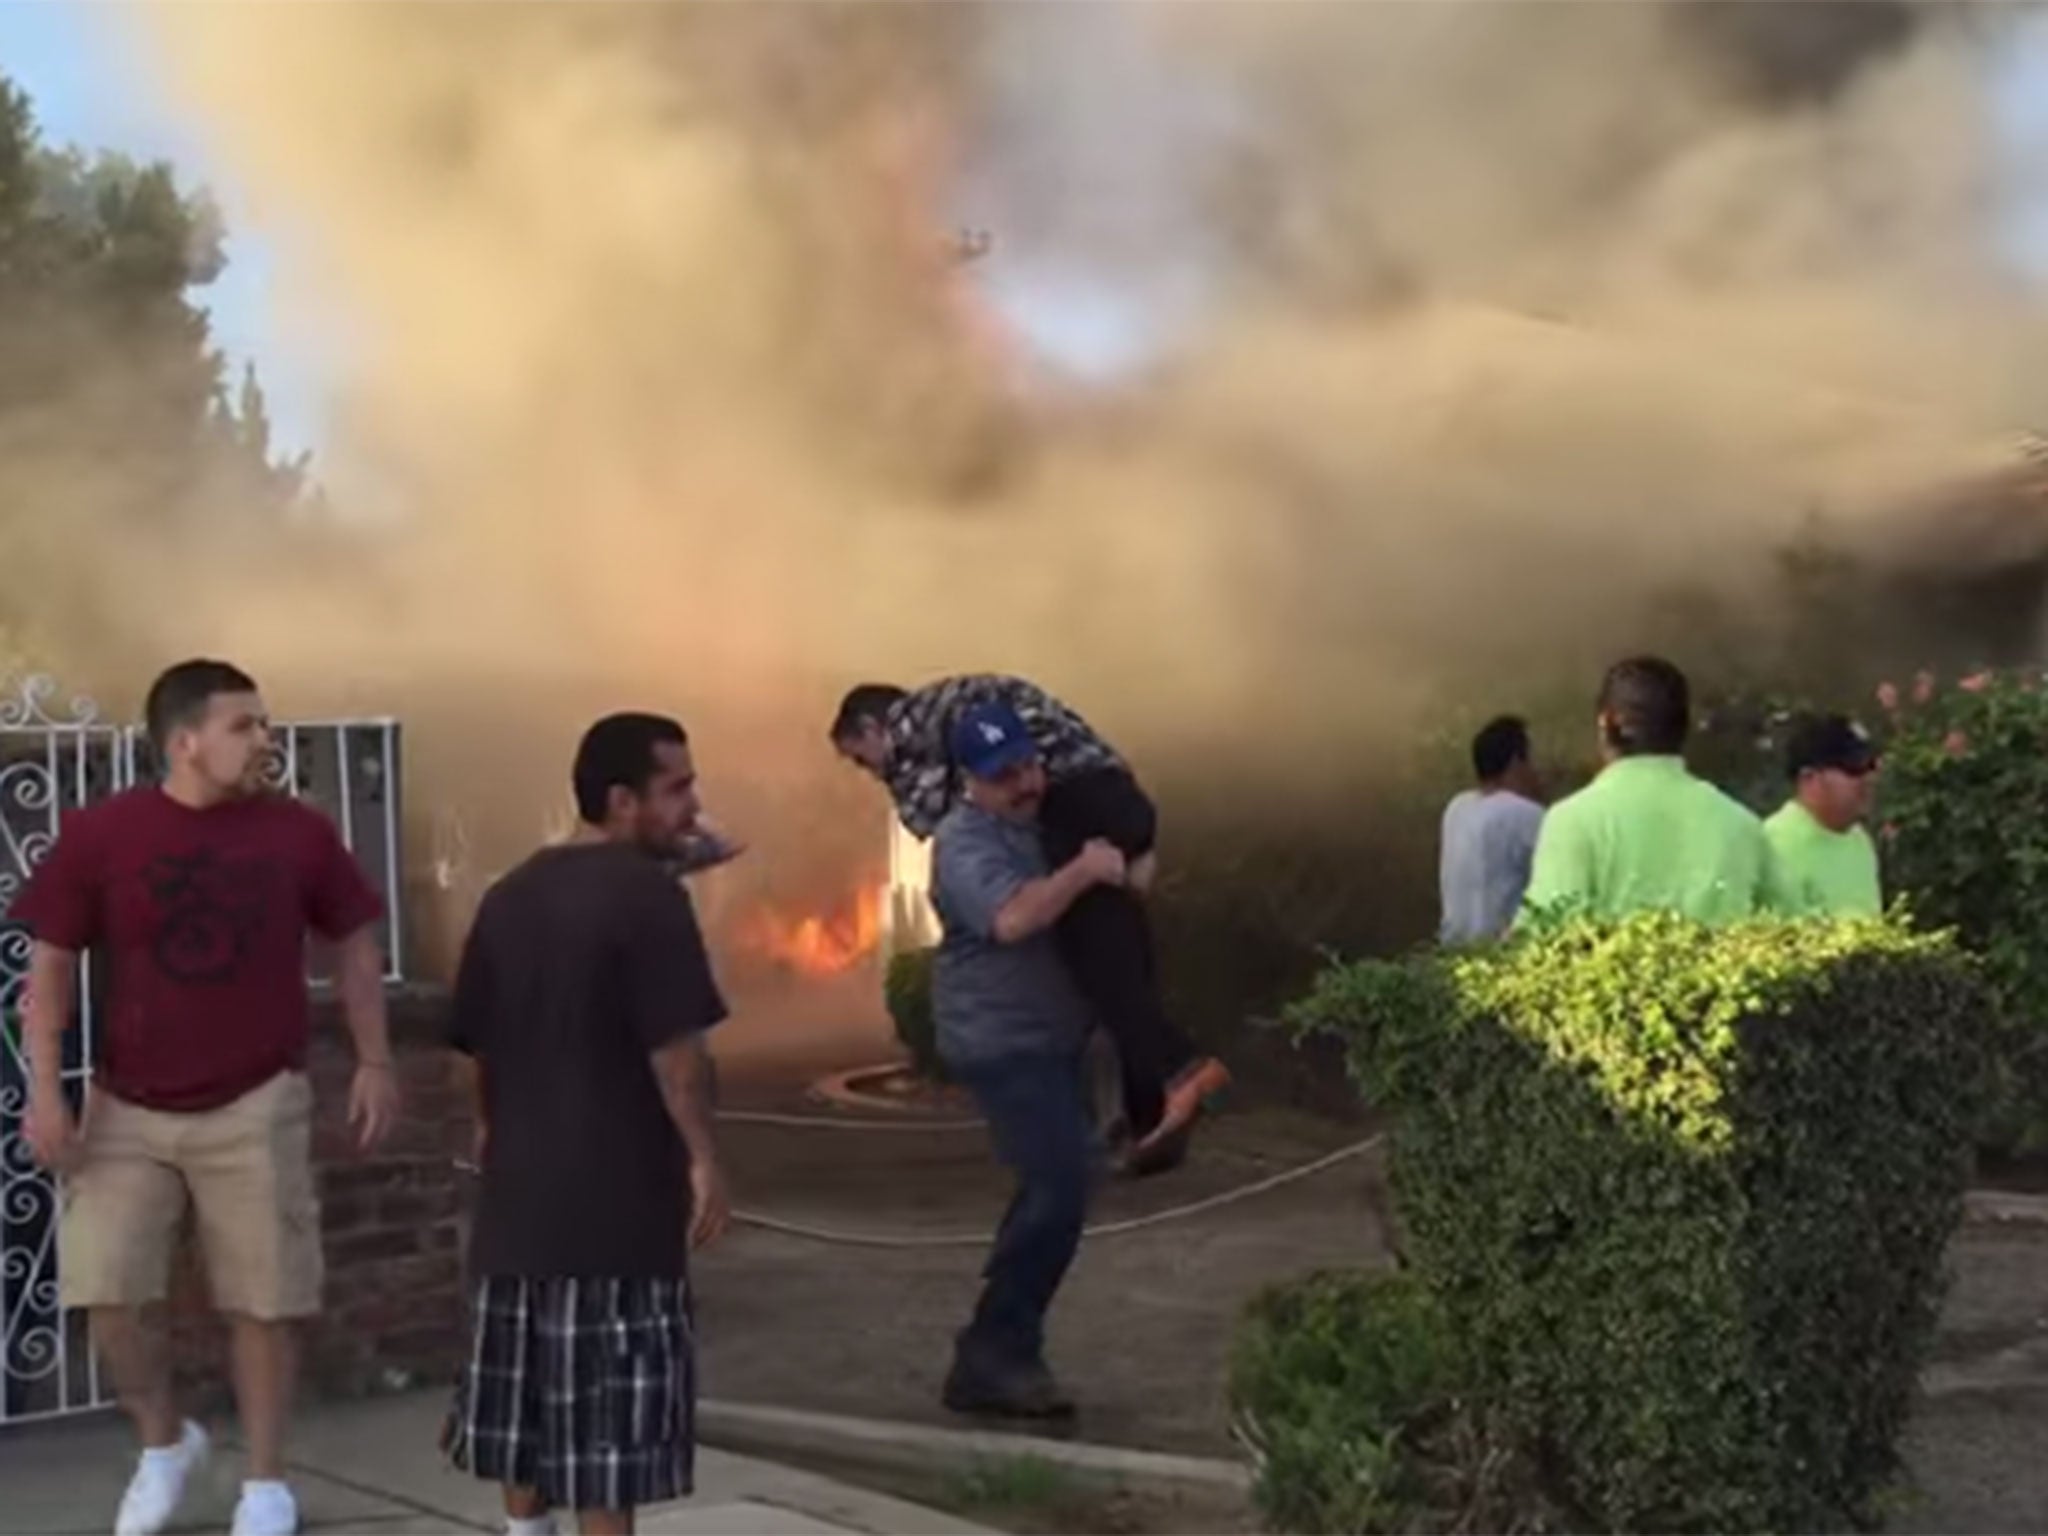 Footage shot by a passerby shows the moment an ill man was carried out of his burning home by a complete stranger.